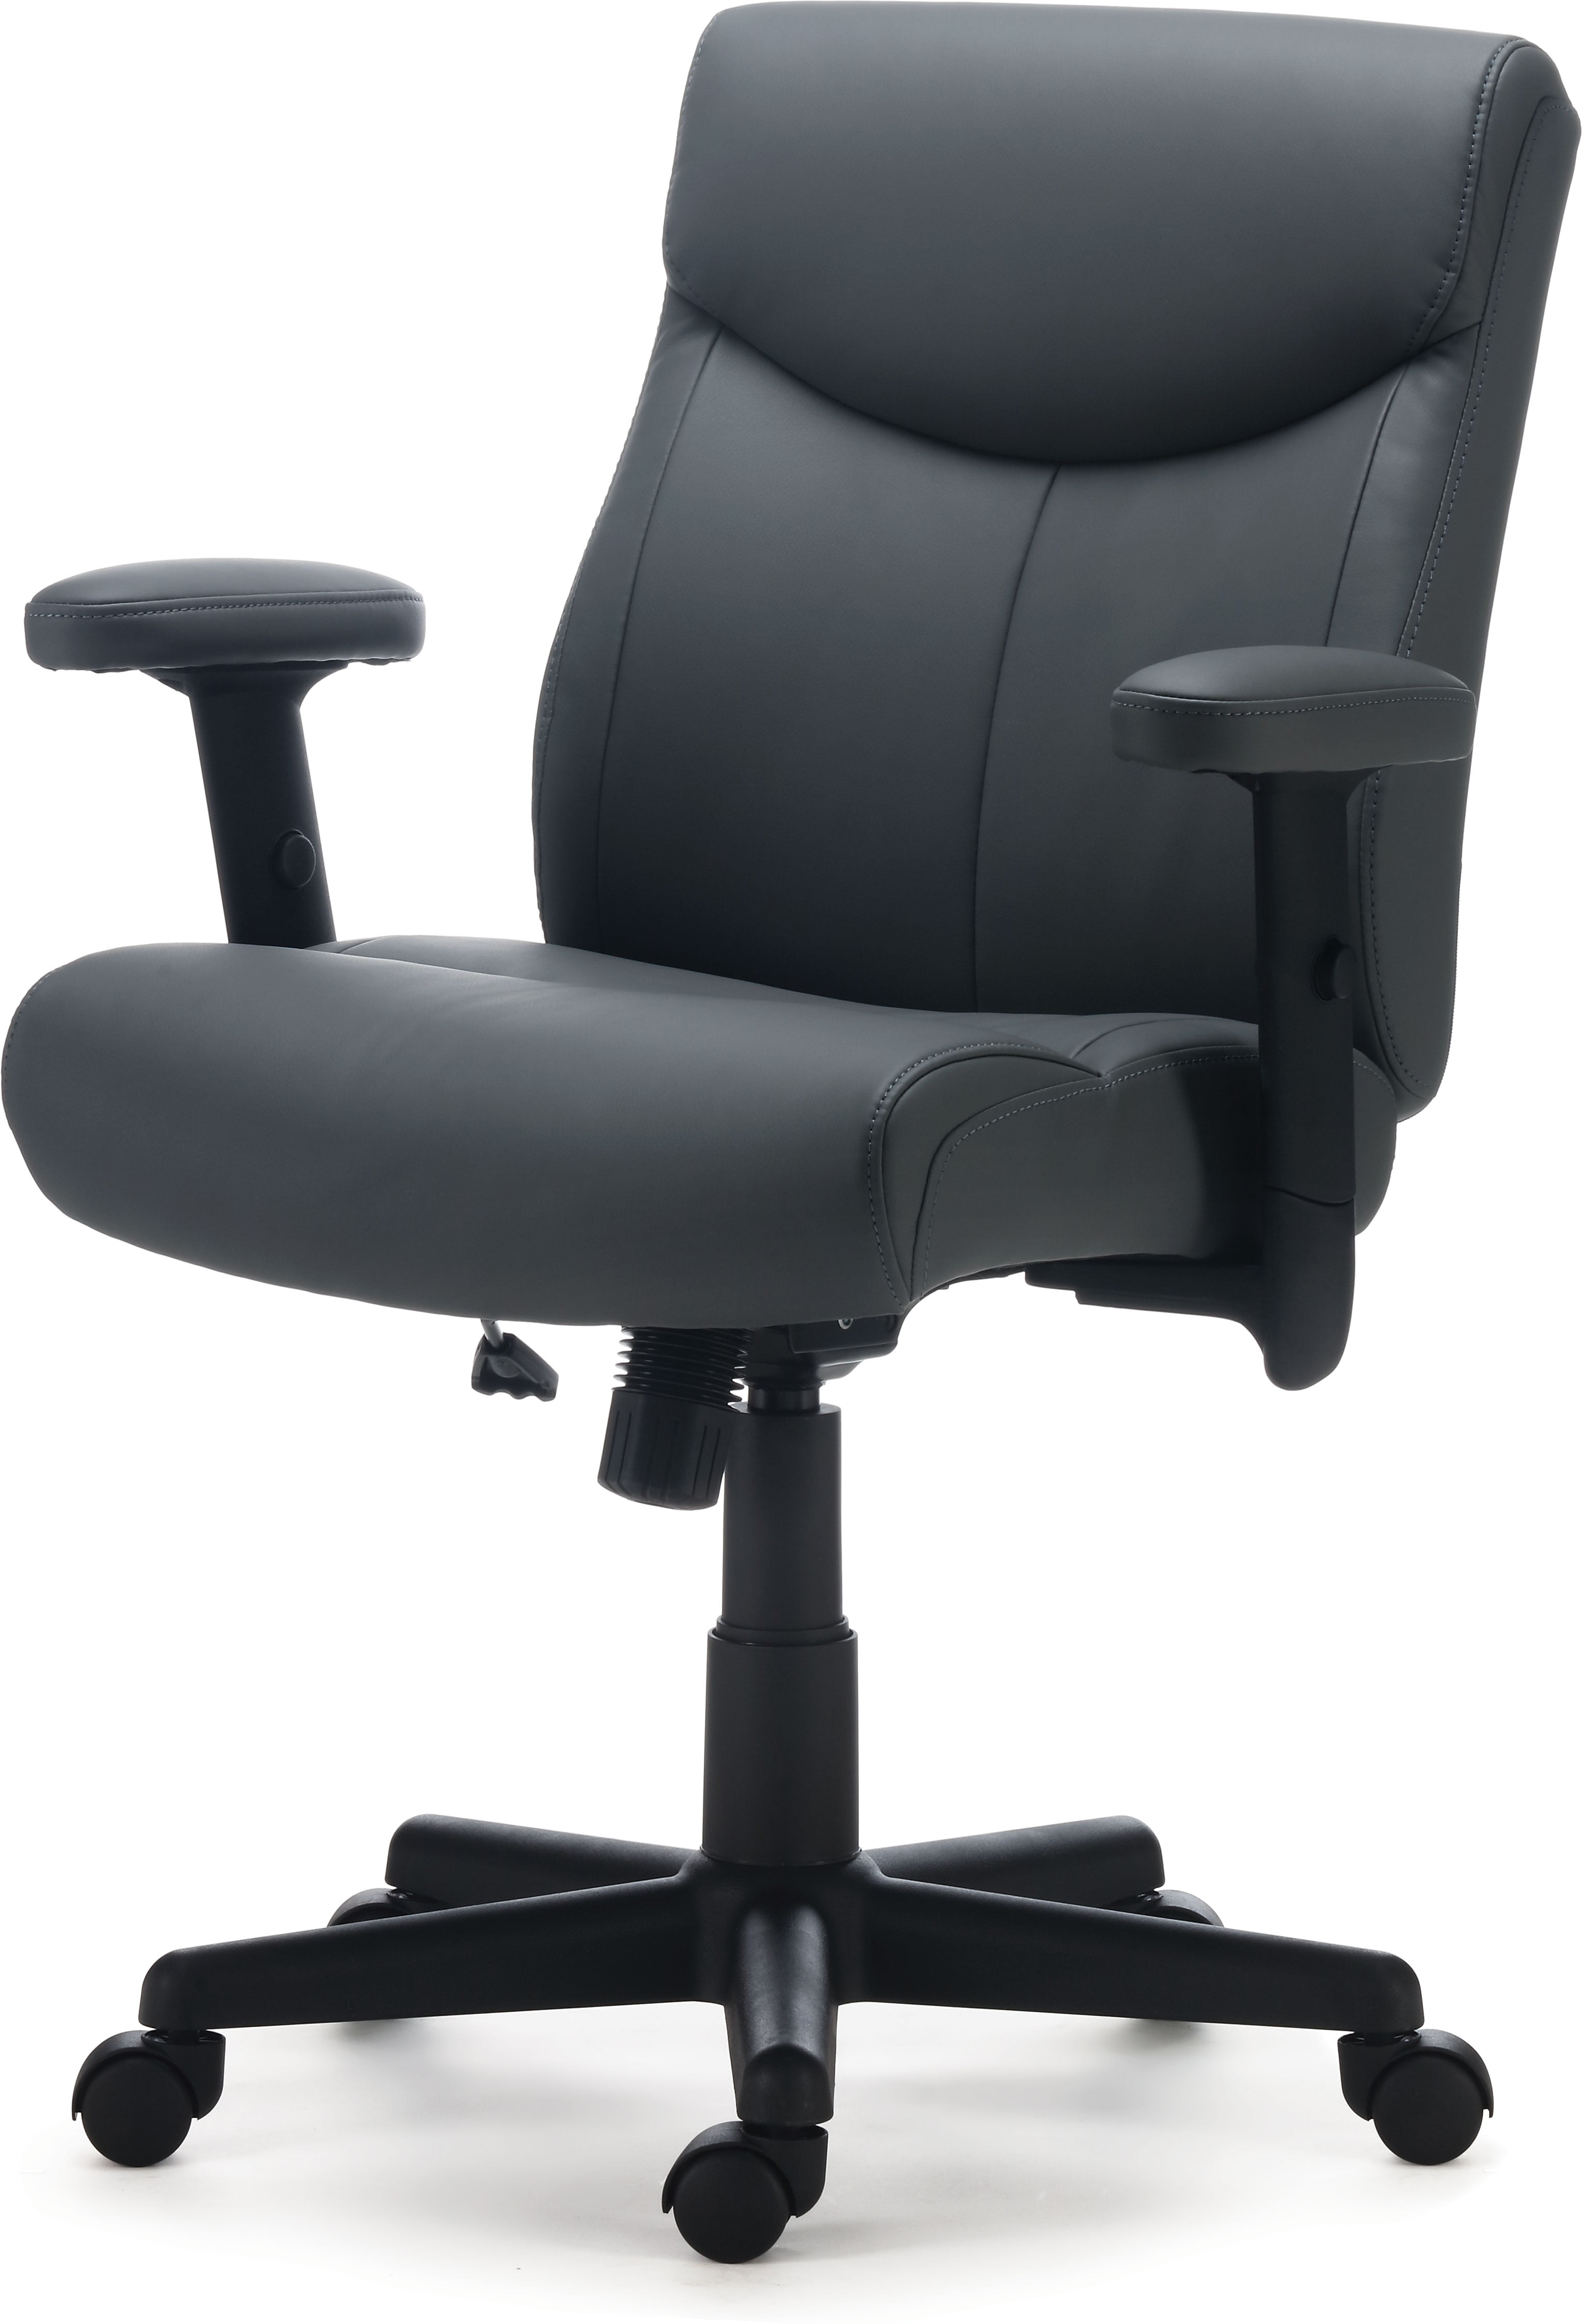 Staples Traymore Luxura Managers Chair Gray (53246) 24328574 - Walmart